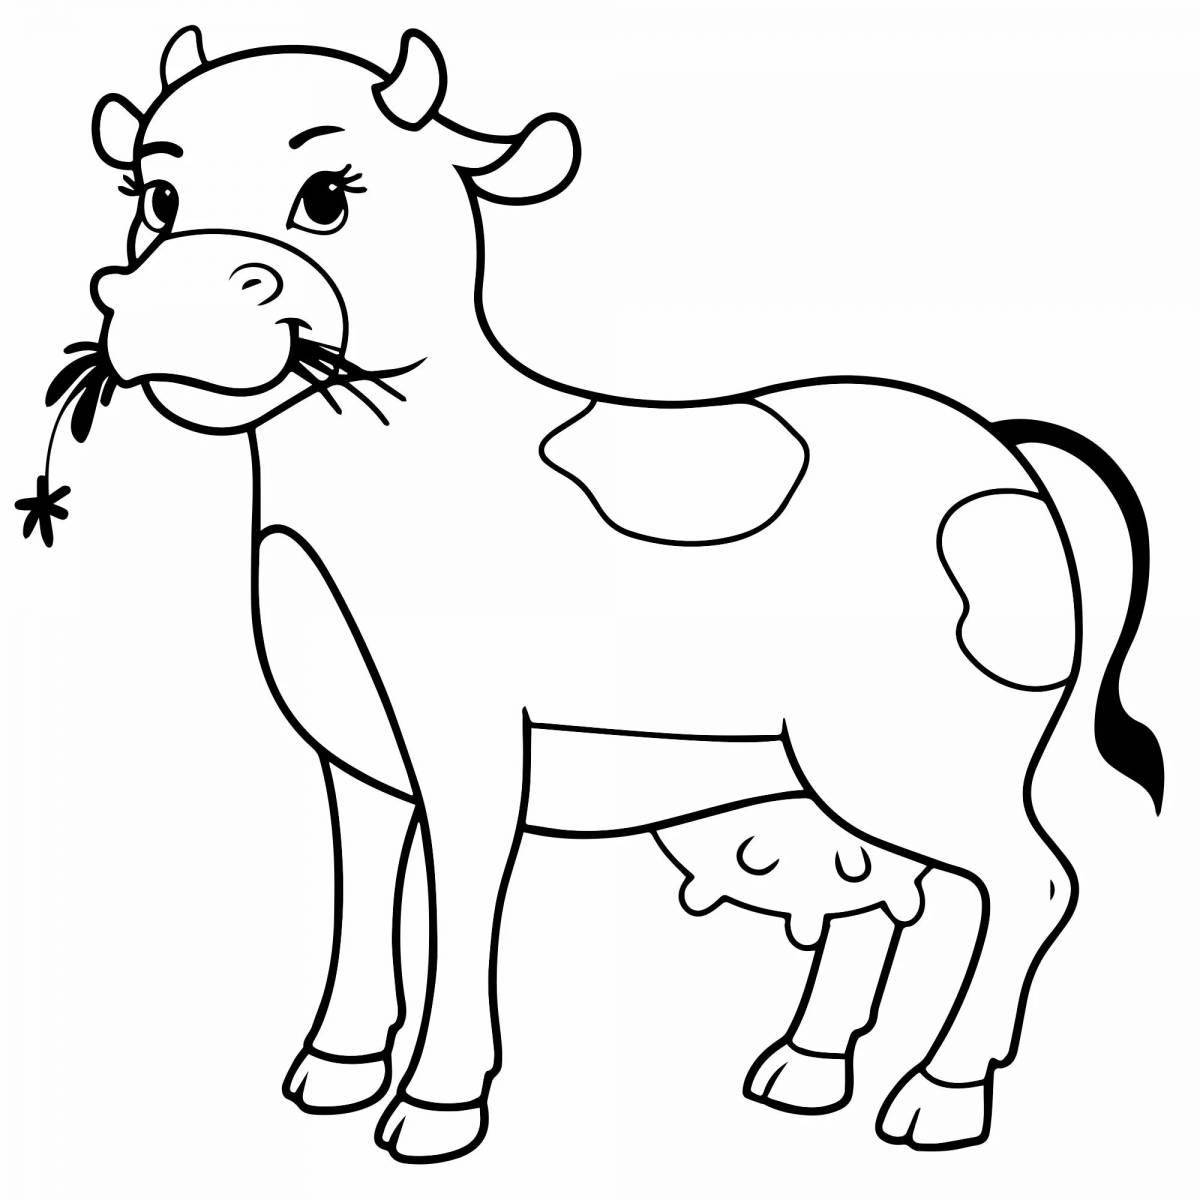 Fun cow coloring for kids